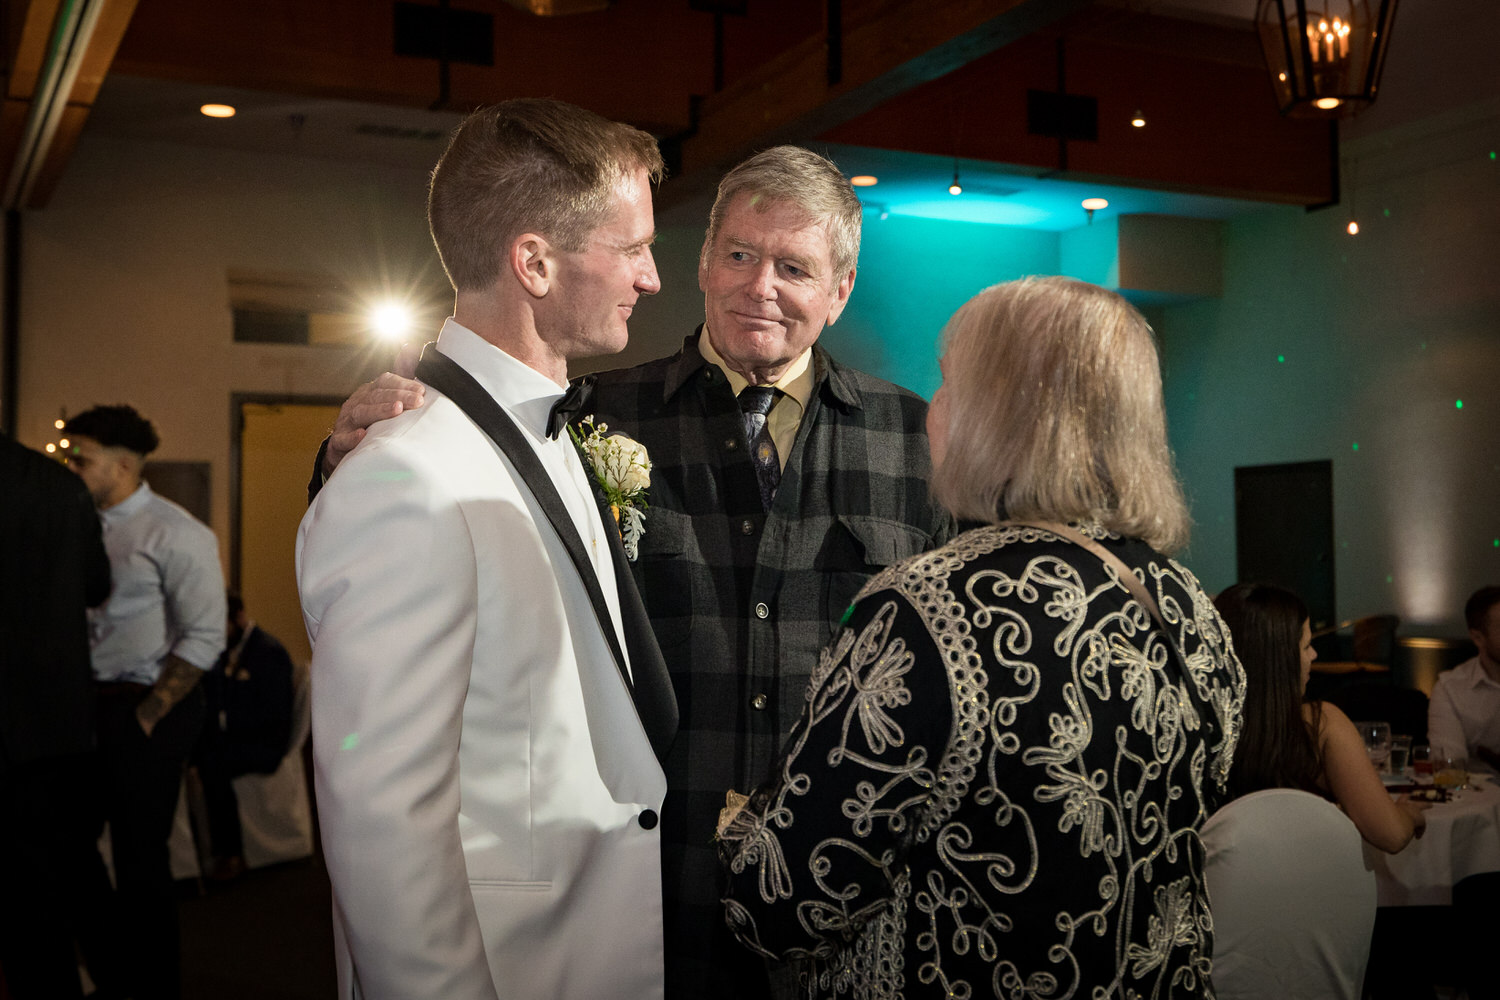 A candid, unposed moment between a groom and his parents captured by wedding photographer Chris Werner.